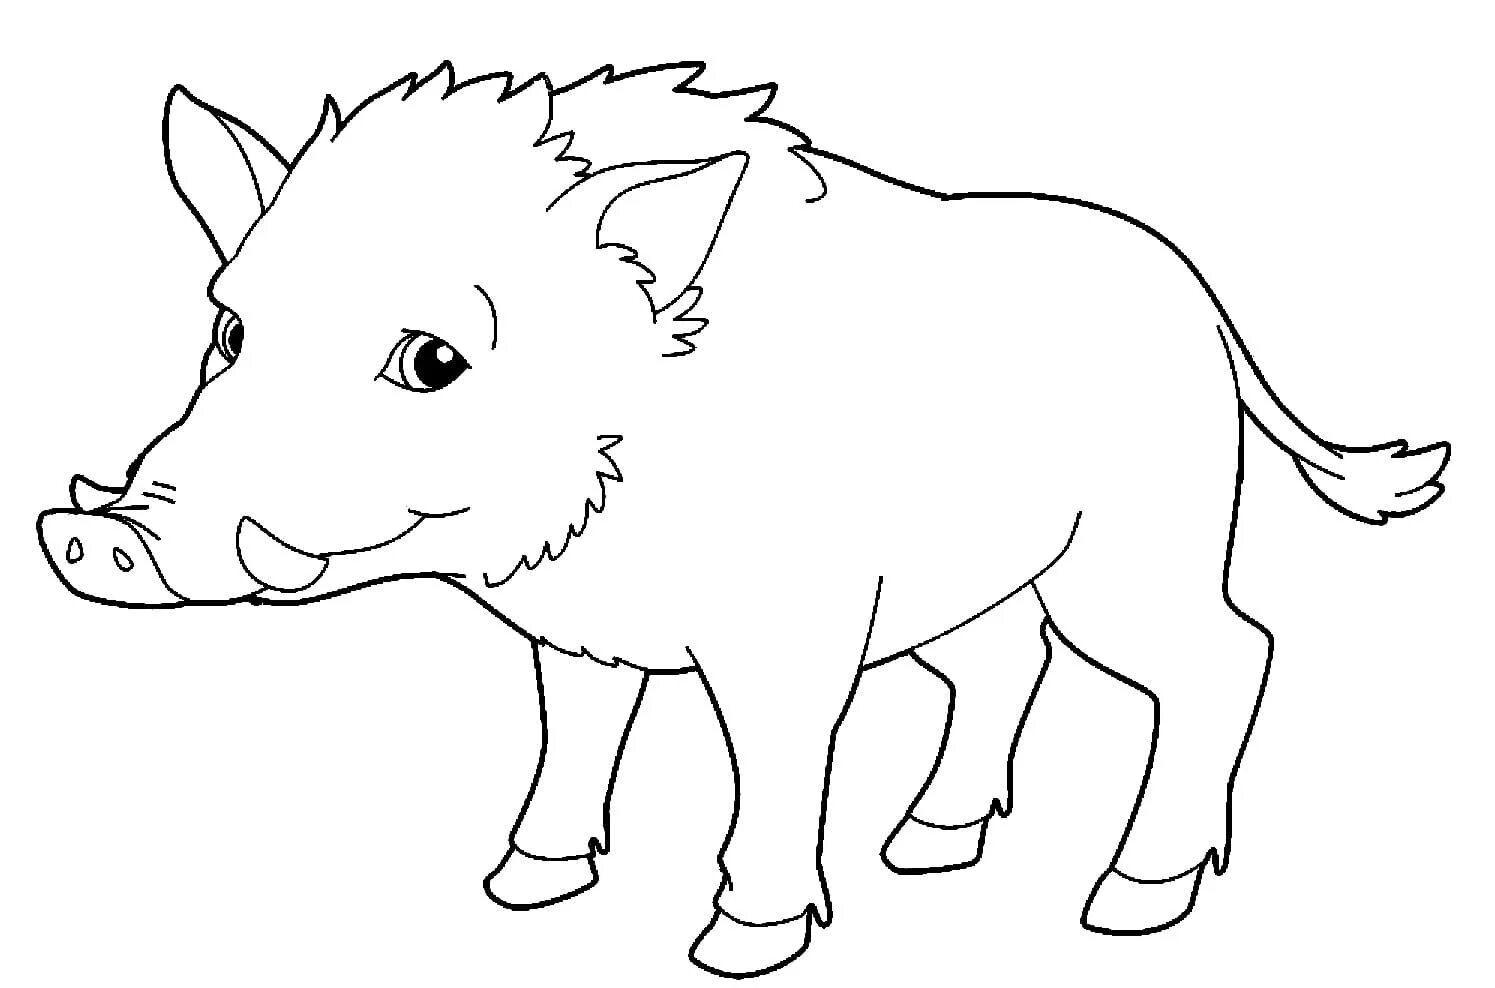 Colorful wild boar coloring page